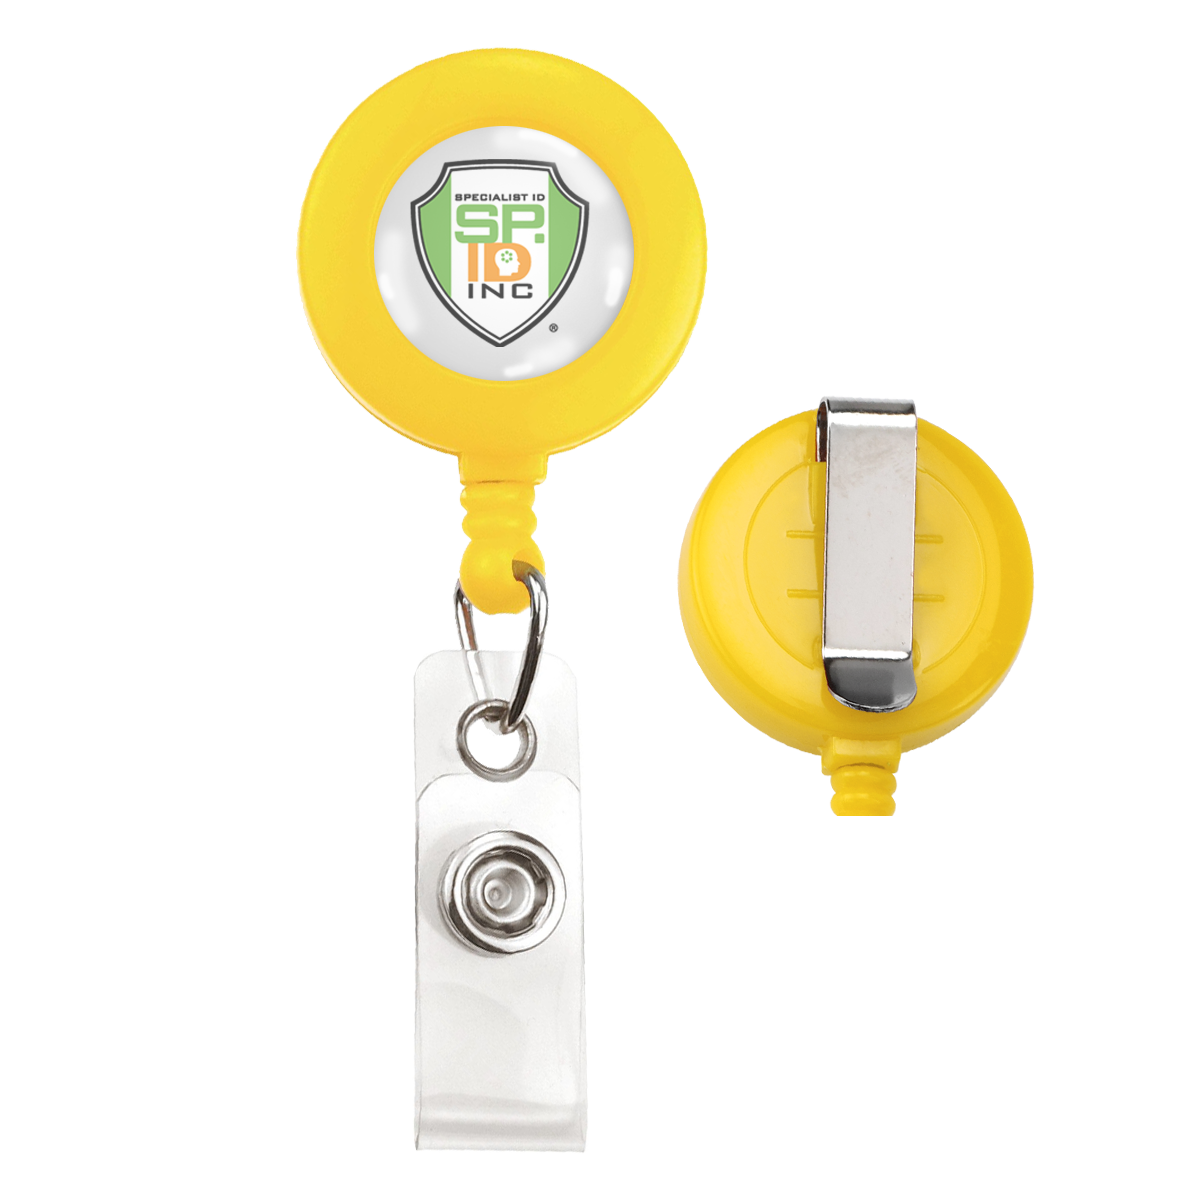 A yellow Custom Printed Retractable Badge Reels With Belt Clip - Personalize with Your Brand Logo with a plastic clip attachment and a metal clip on the back. The front features a circular badge with the SP19 INC logo, showcasing text and a shield design in full color graphics. Custom badge reels like these are perfect for enhancing brand awareness. The image shows both the front and back of the badge reel.